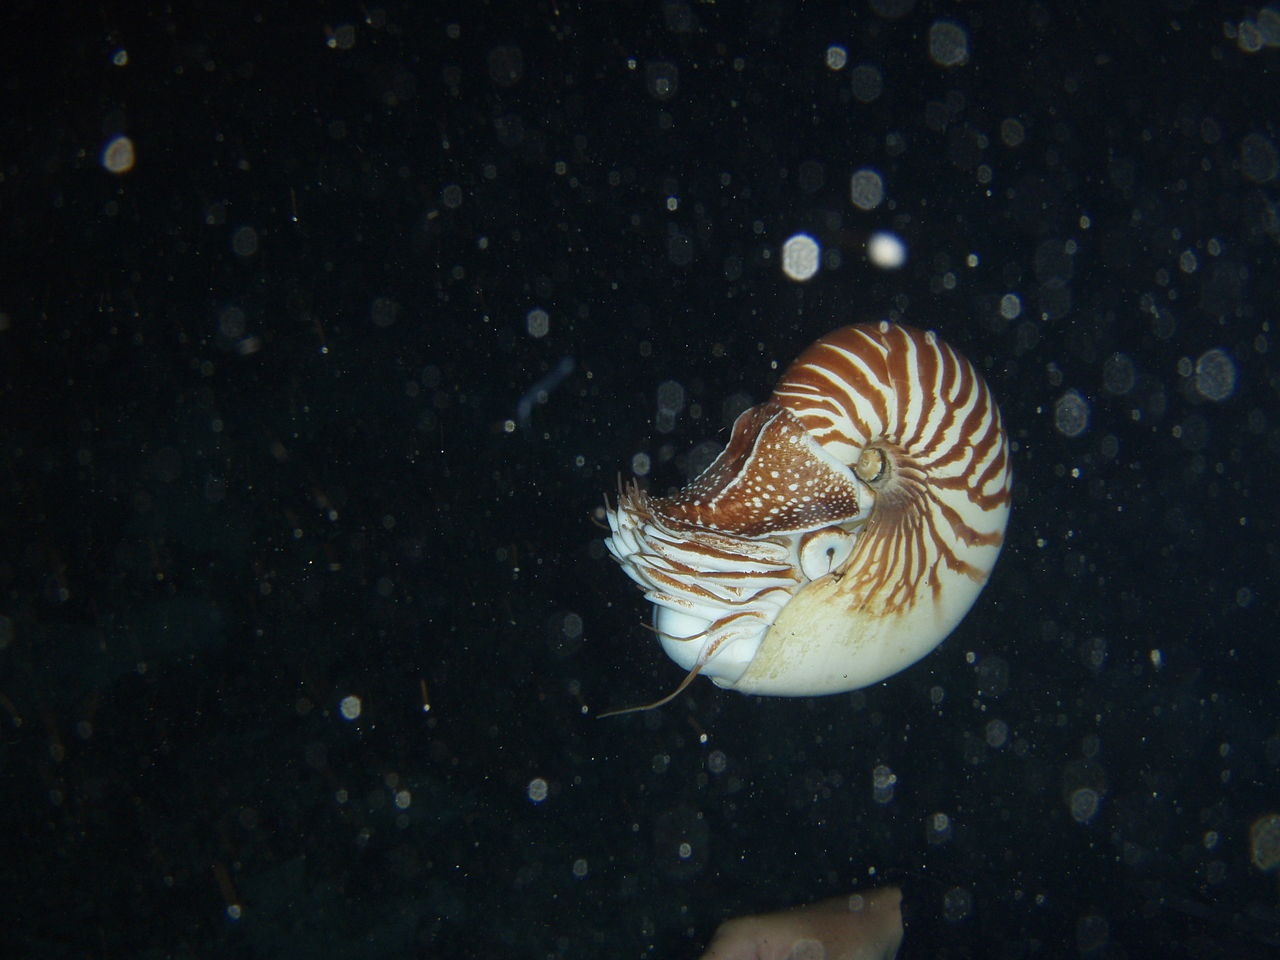 Nautile ombiliqué - Nautilus macromphalus - <a href='https://commons.wikimedia.org/wiki/File:Nautilus_macromphalus_1.jpg' title='via Wikimedia Commons'>Pujolle</a> / <a href='https://creativecommons.org/licenses/by-sa/3.0'>CC BY-SA</a> - BioObs